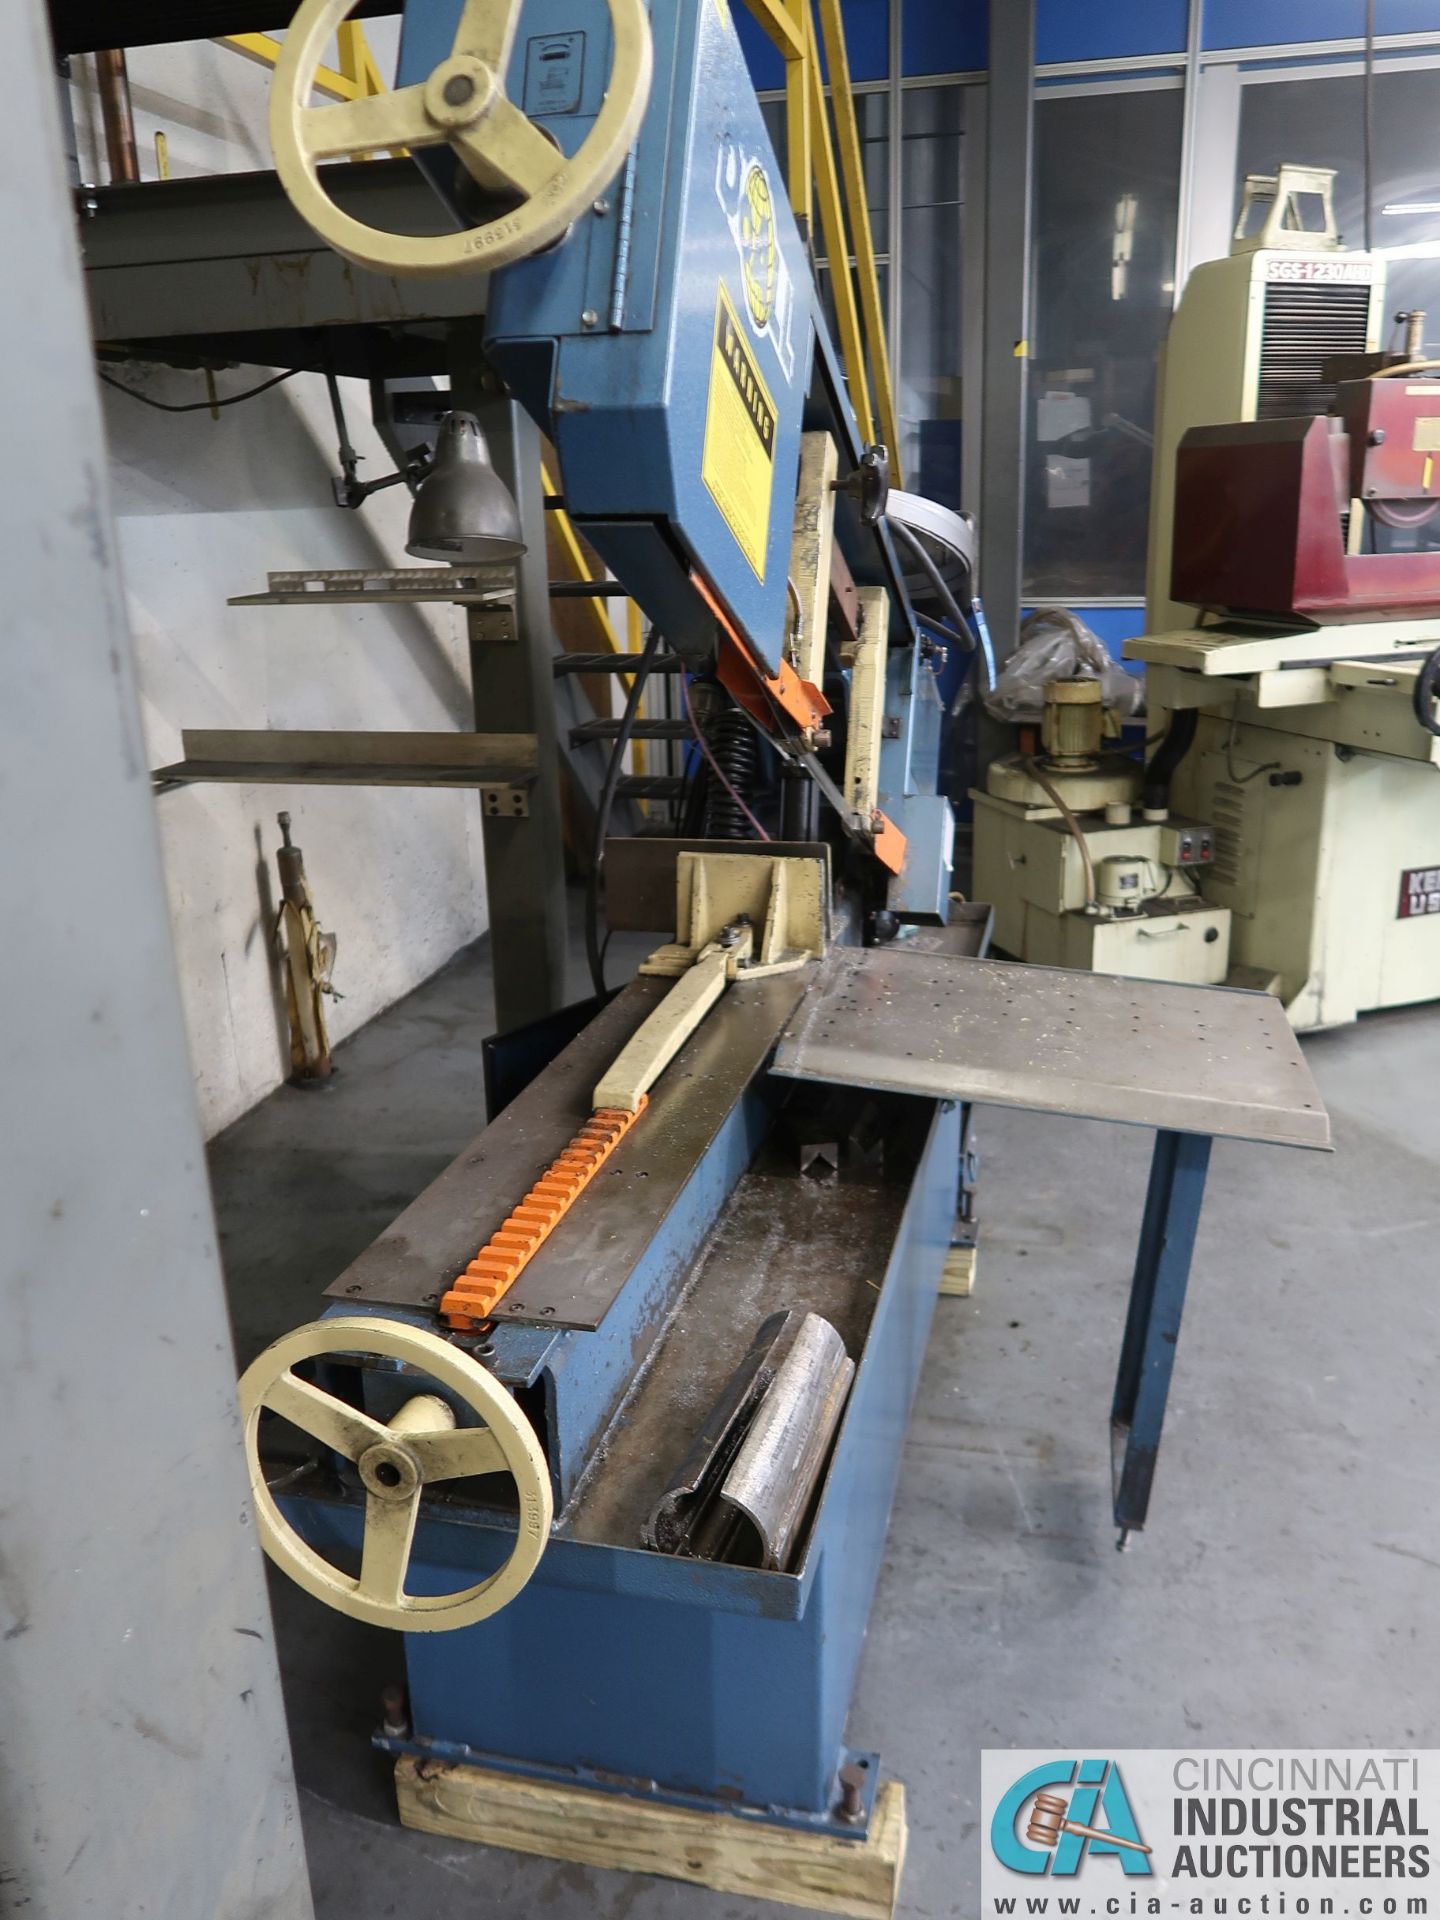 9" X 16" DOALL MODEL C-916 HORIZONTAL BAND SAW; S/N 529-051937 *$300.00 RIGGING FEE DUE TO - Image 5 of 9